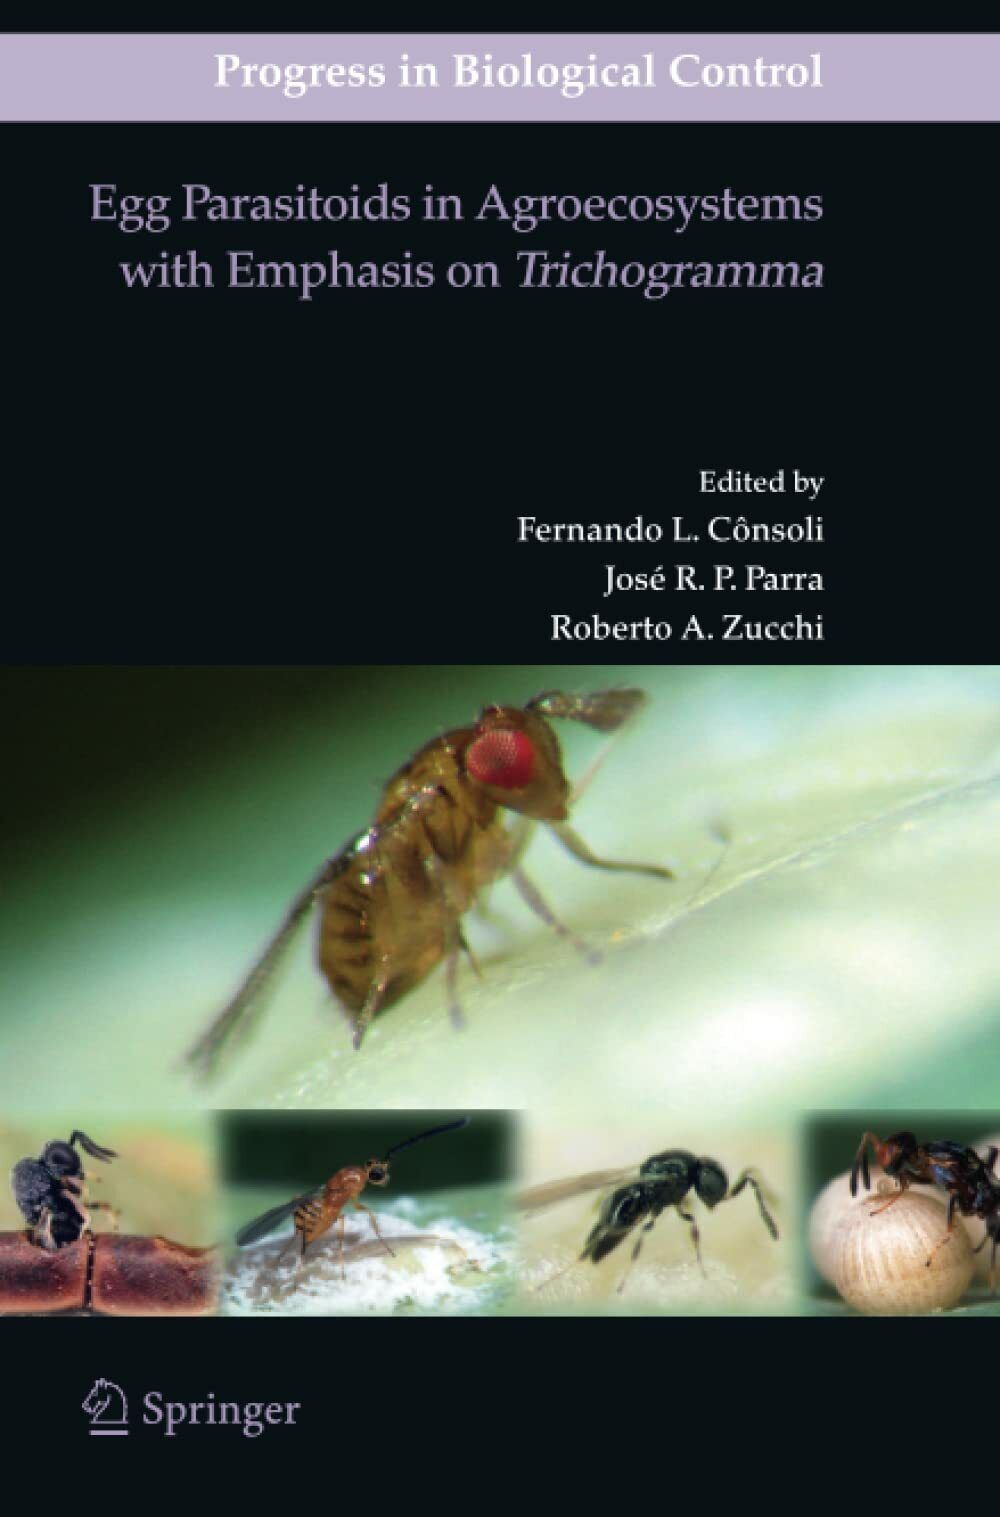 Egg Parasitoids in Agroecosystems with Emphasis on Trichogramma - Springer, 2012